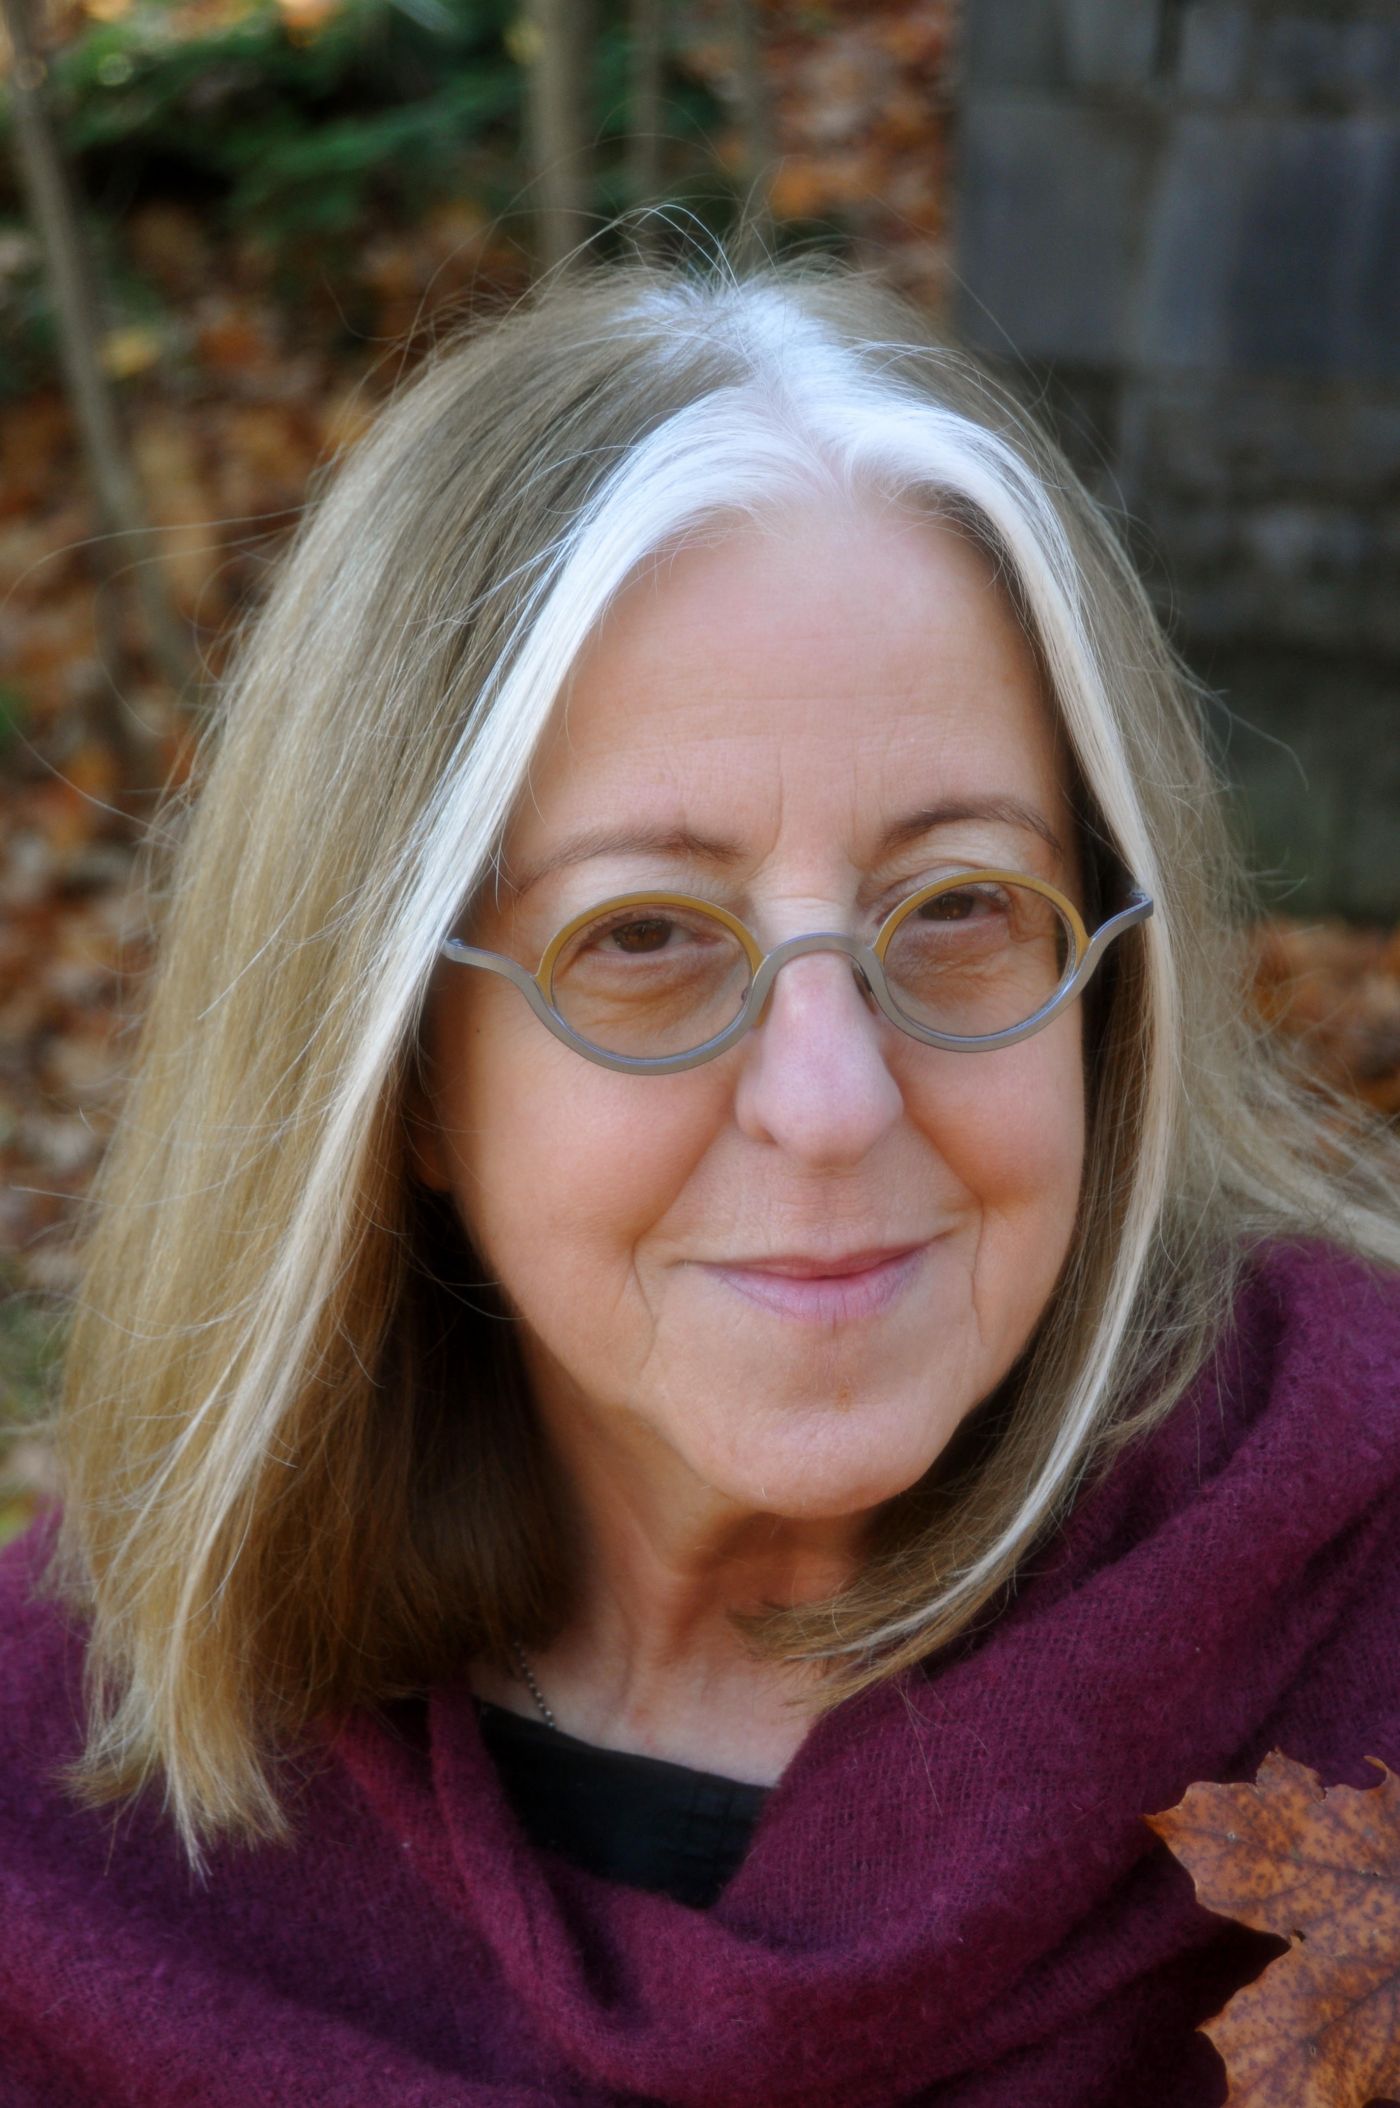 Close-up colour photograph of an older woman with glasses and medium-length salt-and-pepper hair. She wears a purple scarf in the outdoor autumn setting. She smiles at the camera.